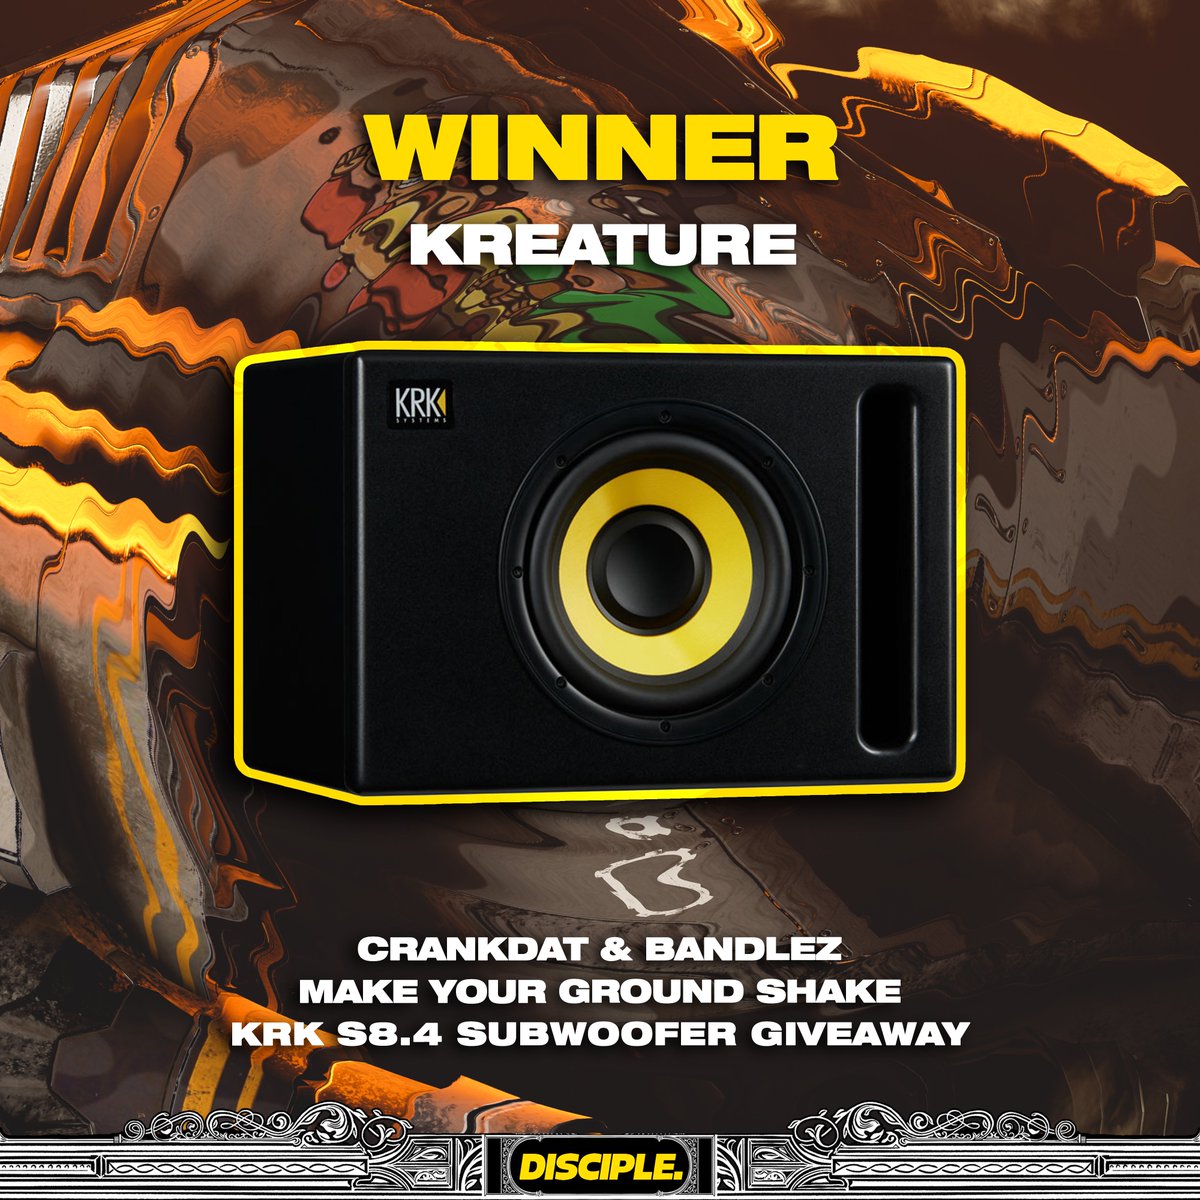 Congrats to @KreatureDubs on winning this bad boy ground shaking KRK sub! Thank you everyone that entered.